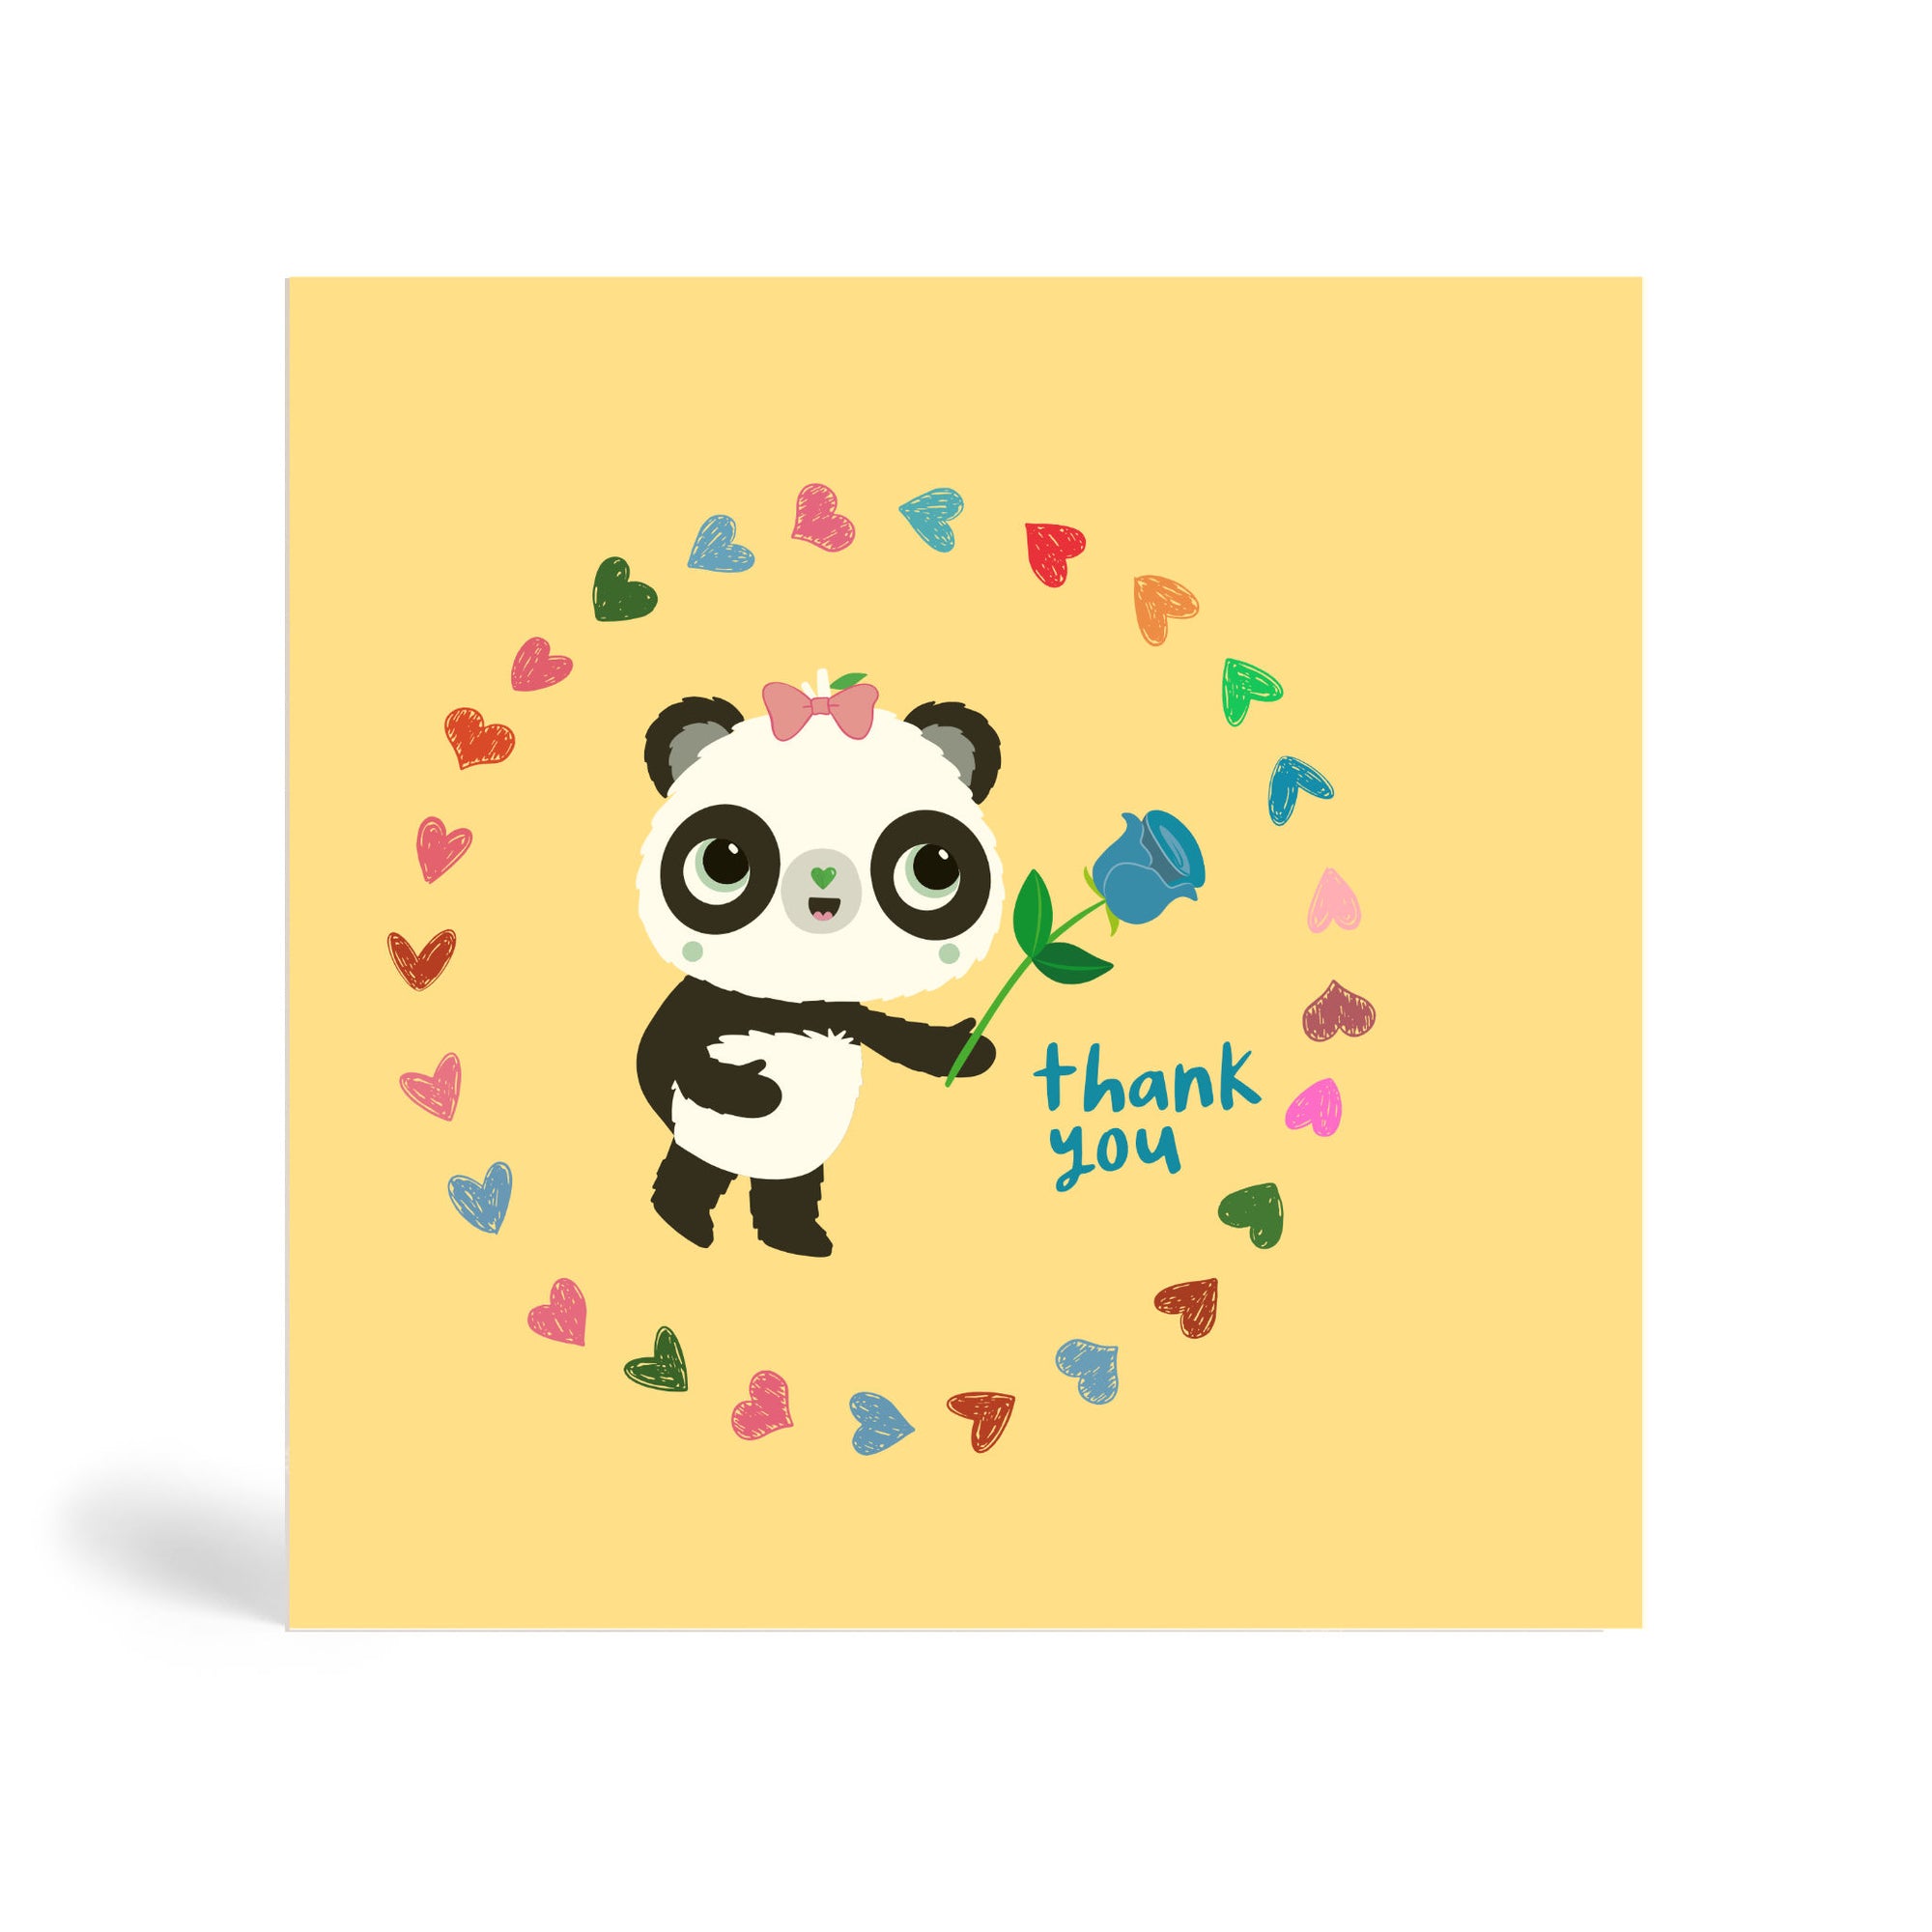 150mm square cream eco-friendly, tree free, blue rose thank you greeting card with Panda with bow on head, holding a blue rose surrounded by circle of different colour heart shapes and saying thank you. Panda Joy UK, environmentally friendly greeting cards.